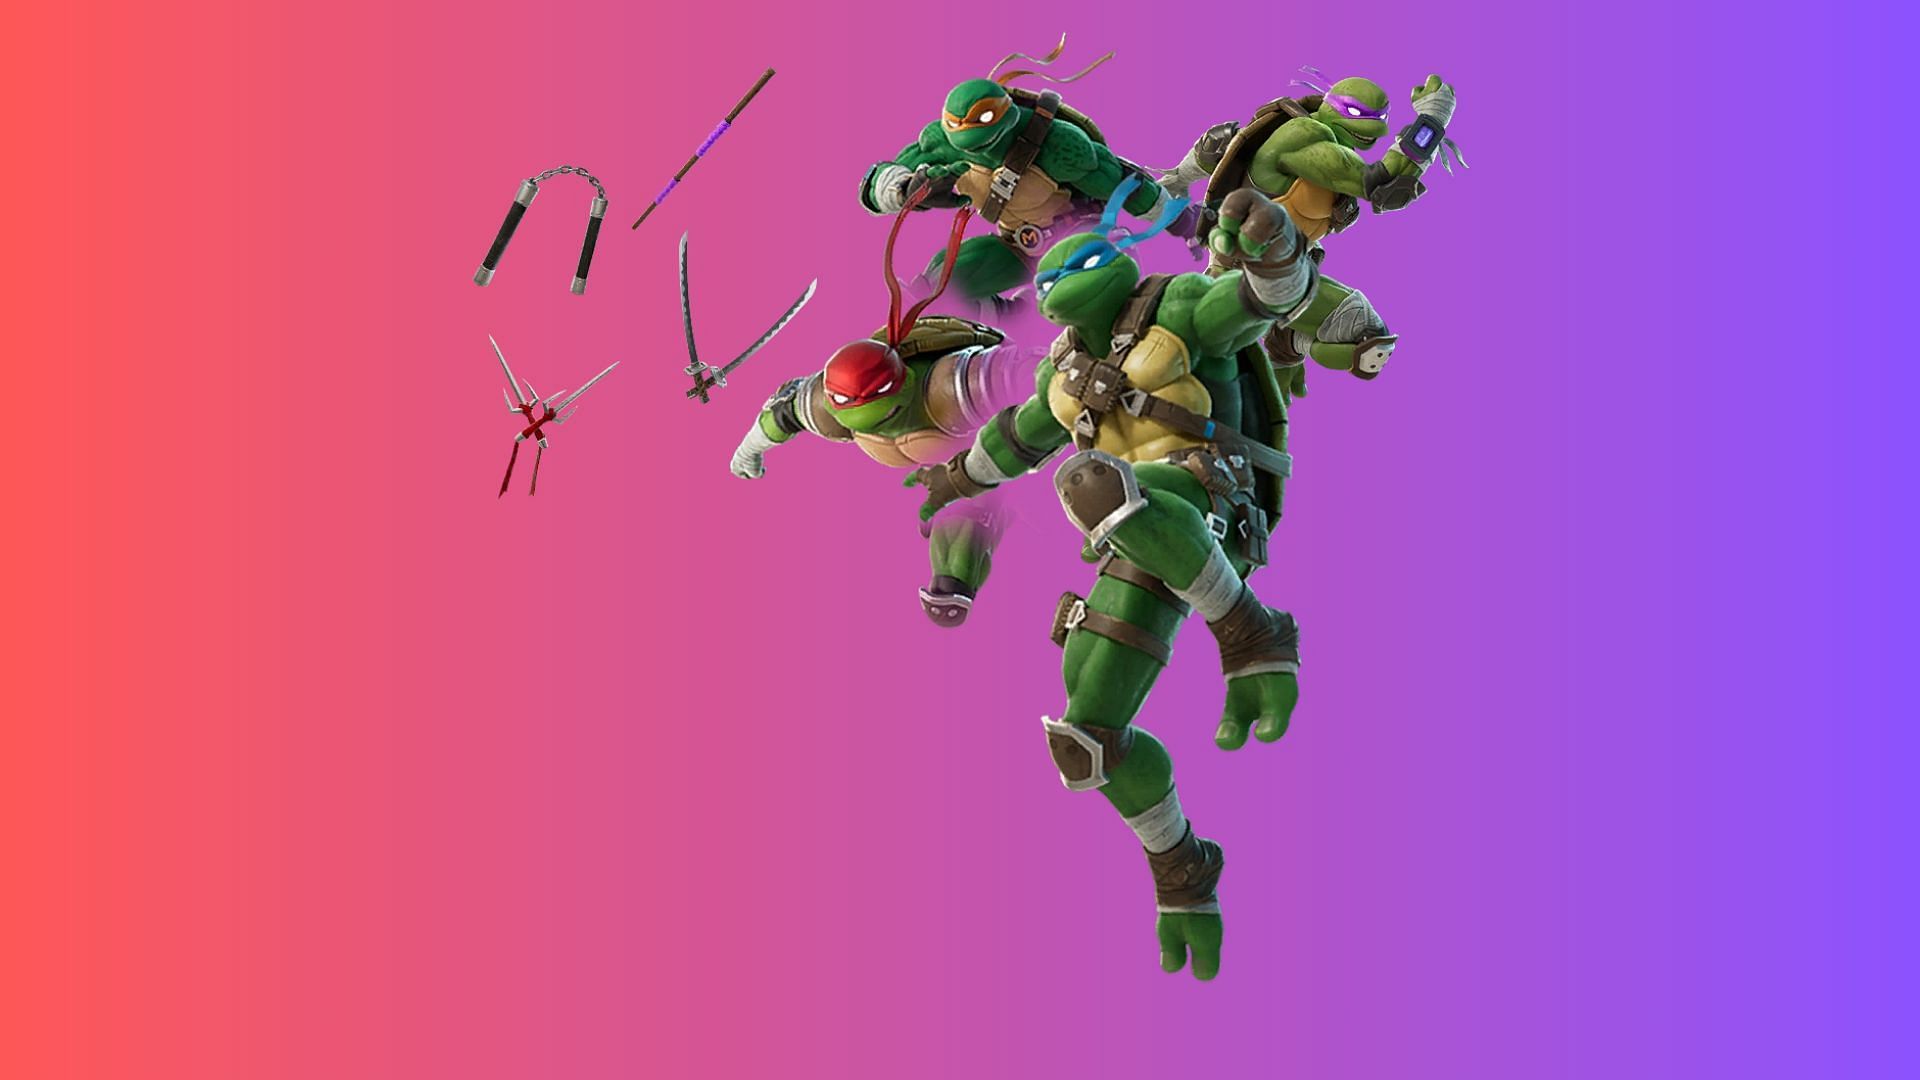 Where to find and search a Ninja Turtle Supply Drop in Fortnite